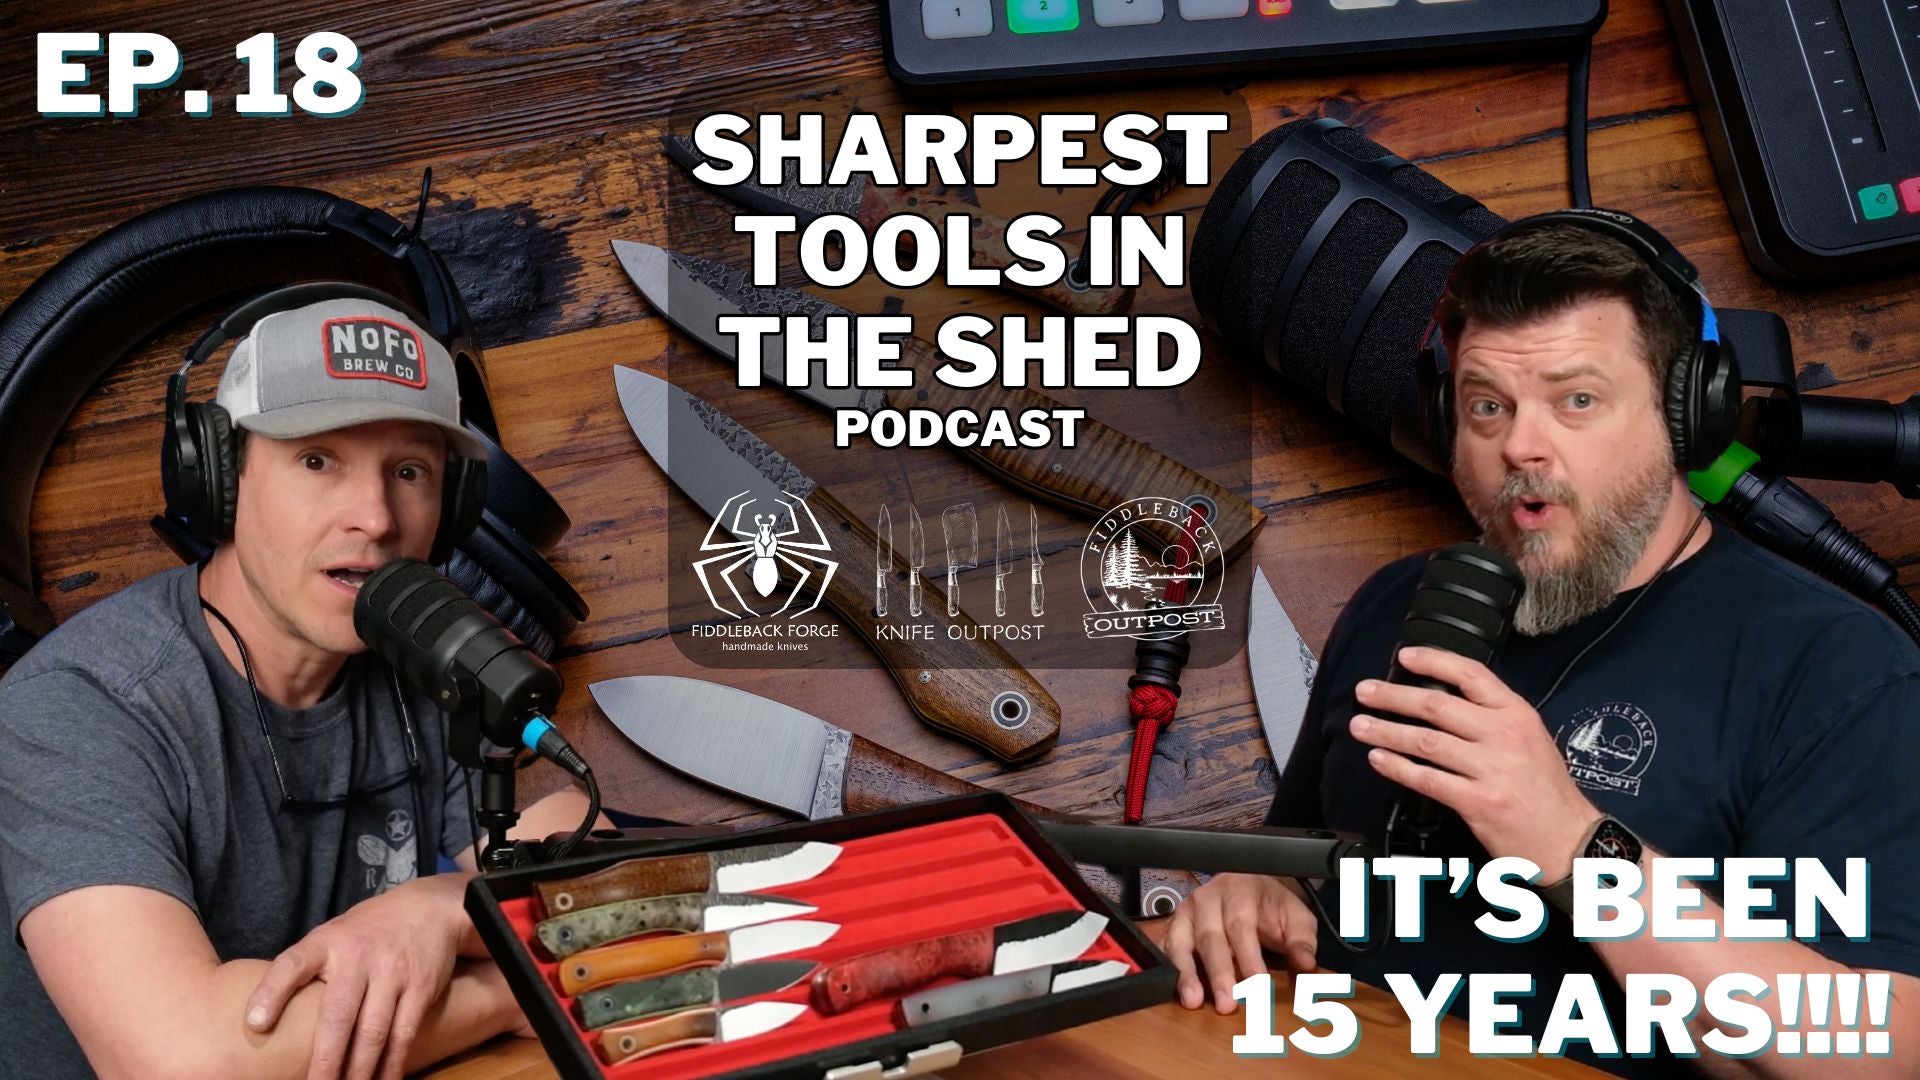 15 YEARS Full Time Professional Knife Maker, New Knives, and Story Time With Andy - Ep. 18